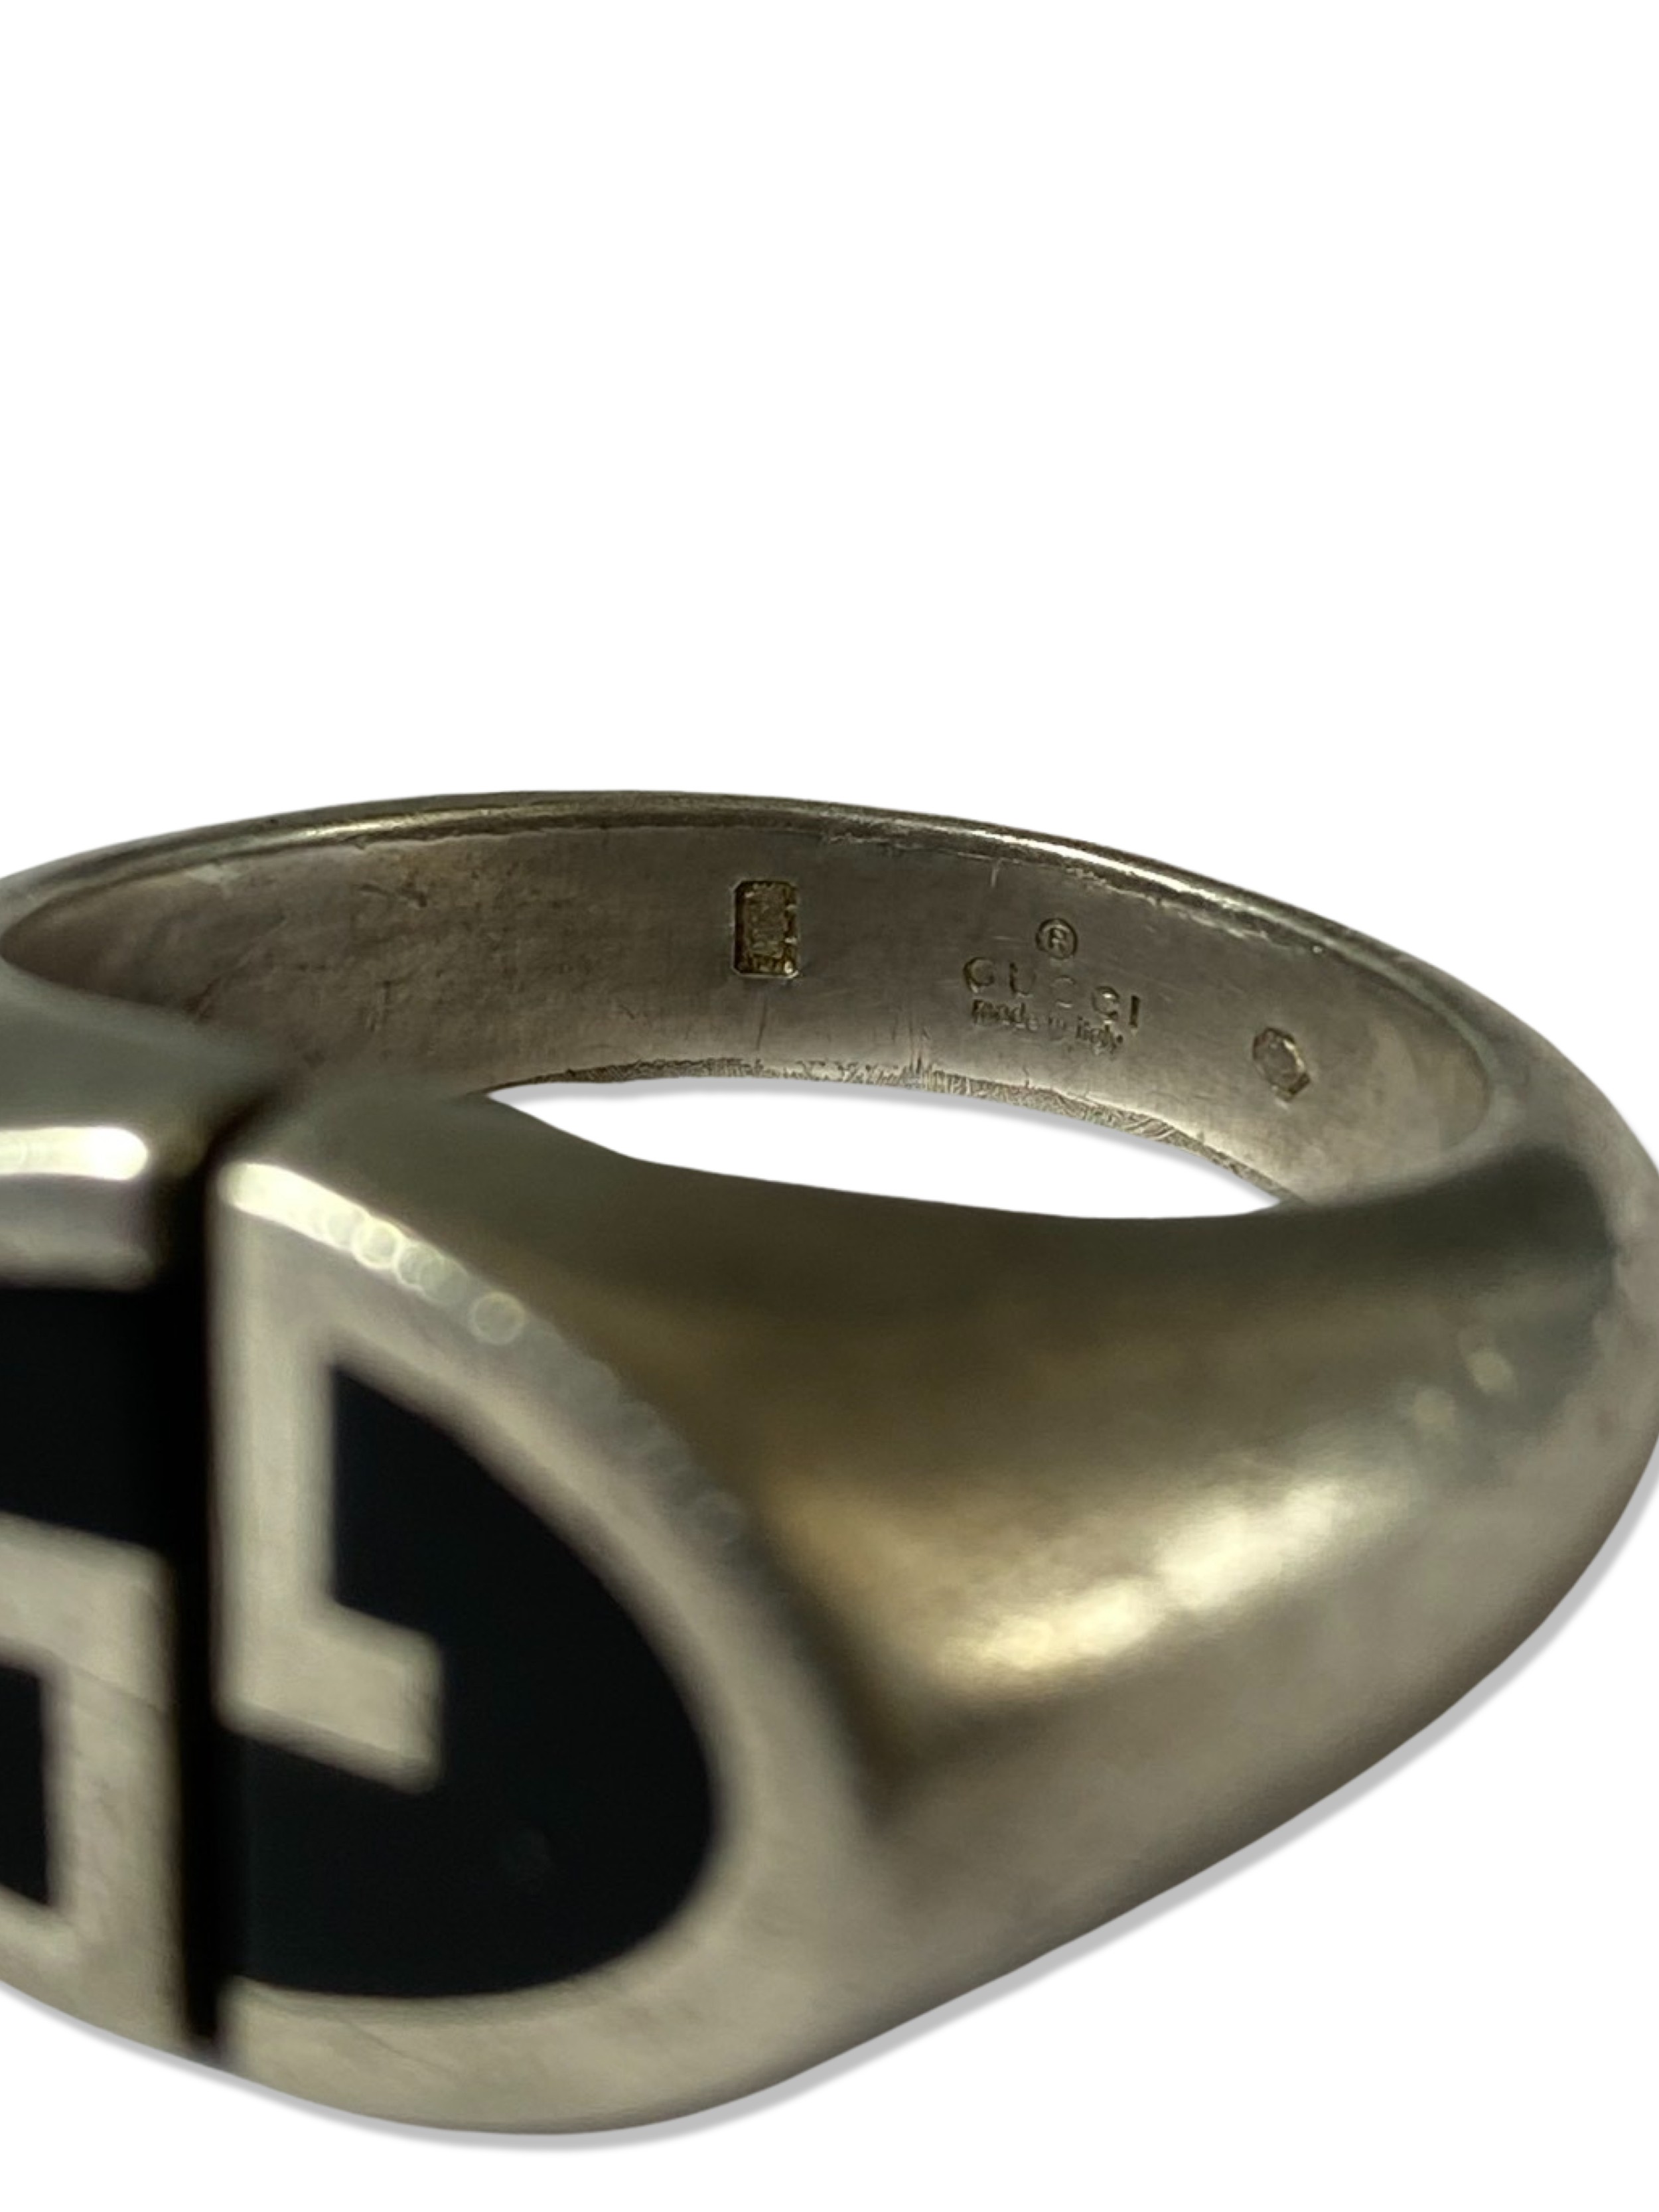 Gucci Double G Silver & Oynx Split Ring weighing 15.49 grams size S - Image 2 of 2